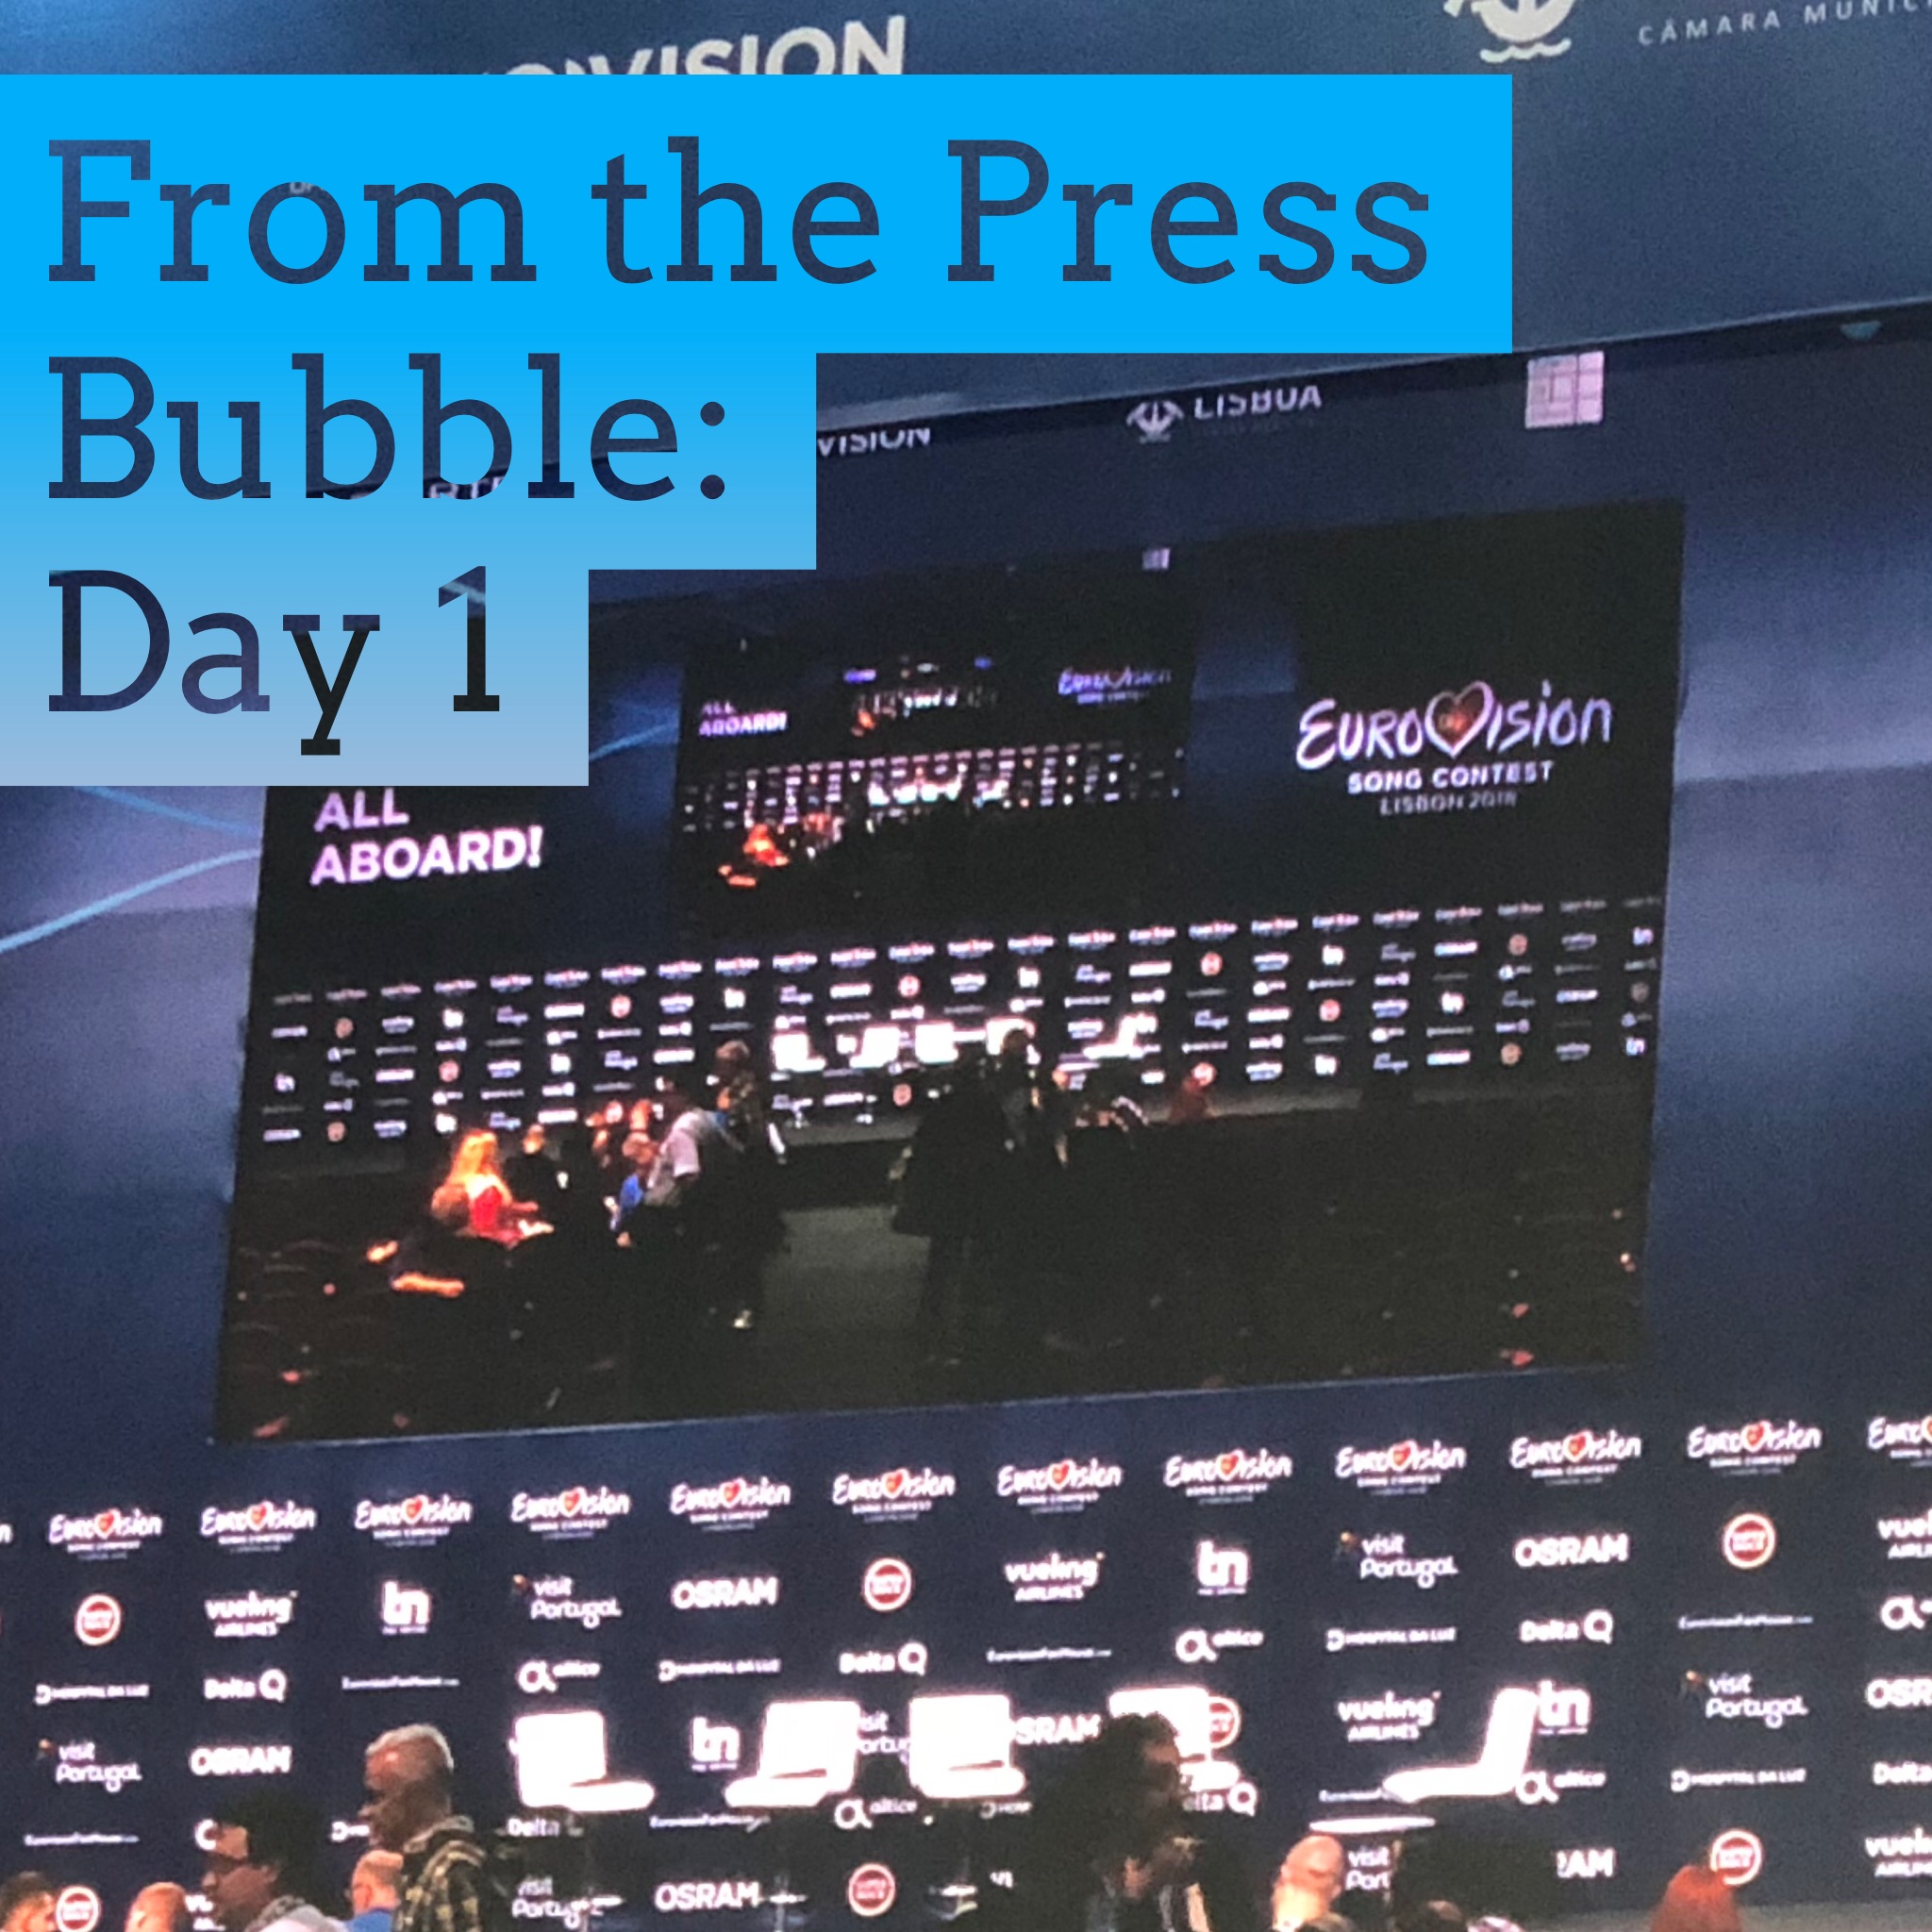 From the 2018 Press Bubble: Day 1